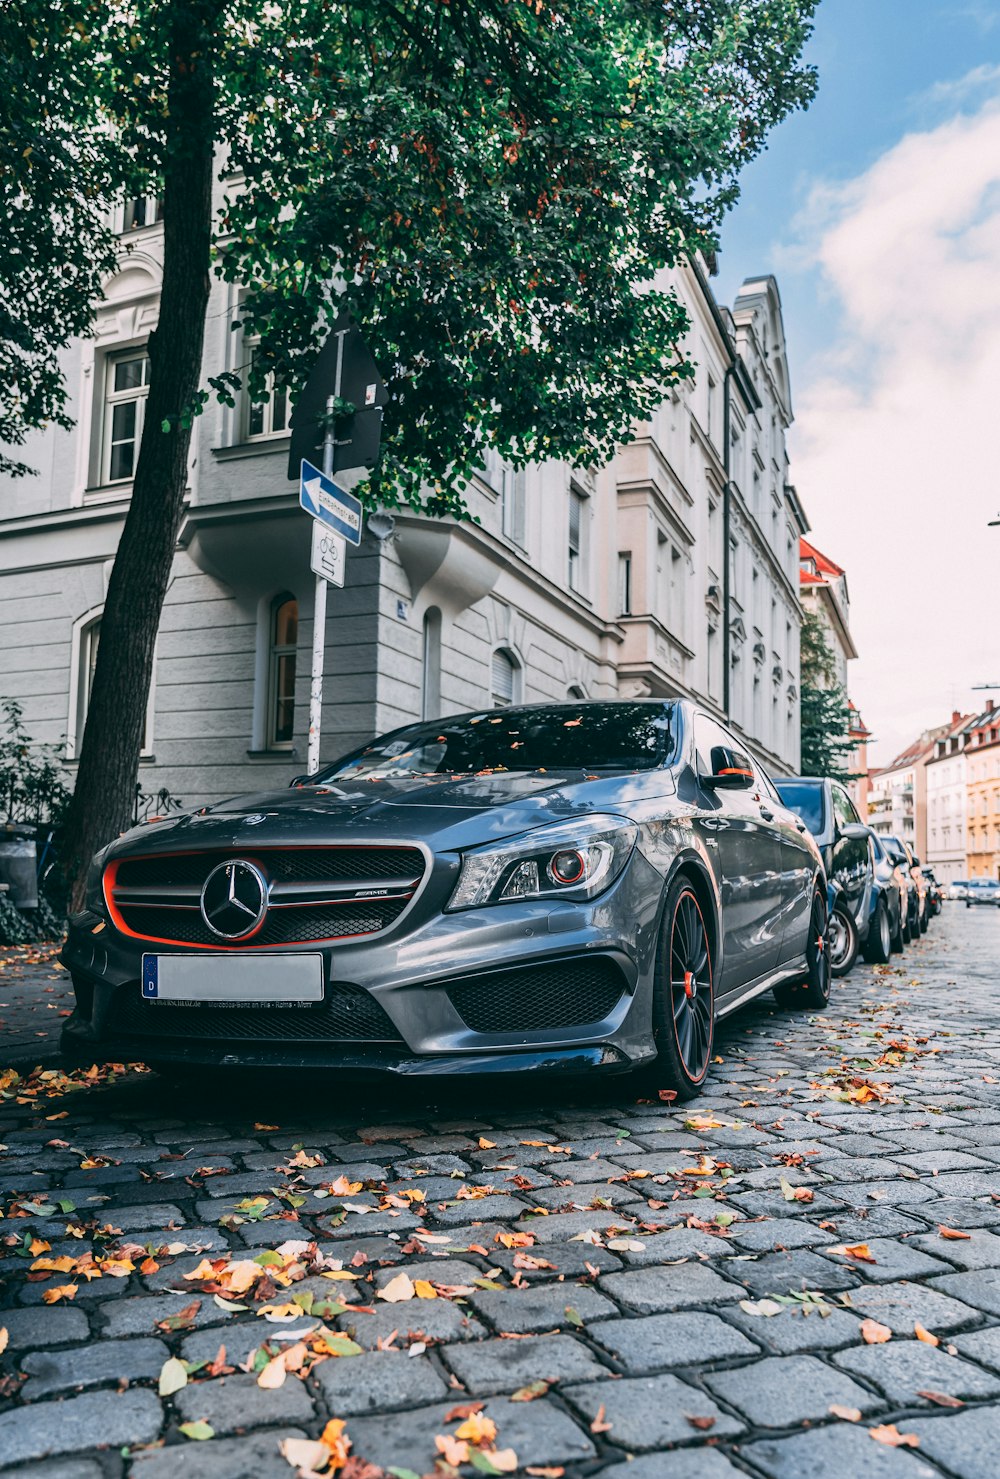 parked gray Mercedes car